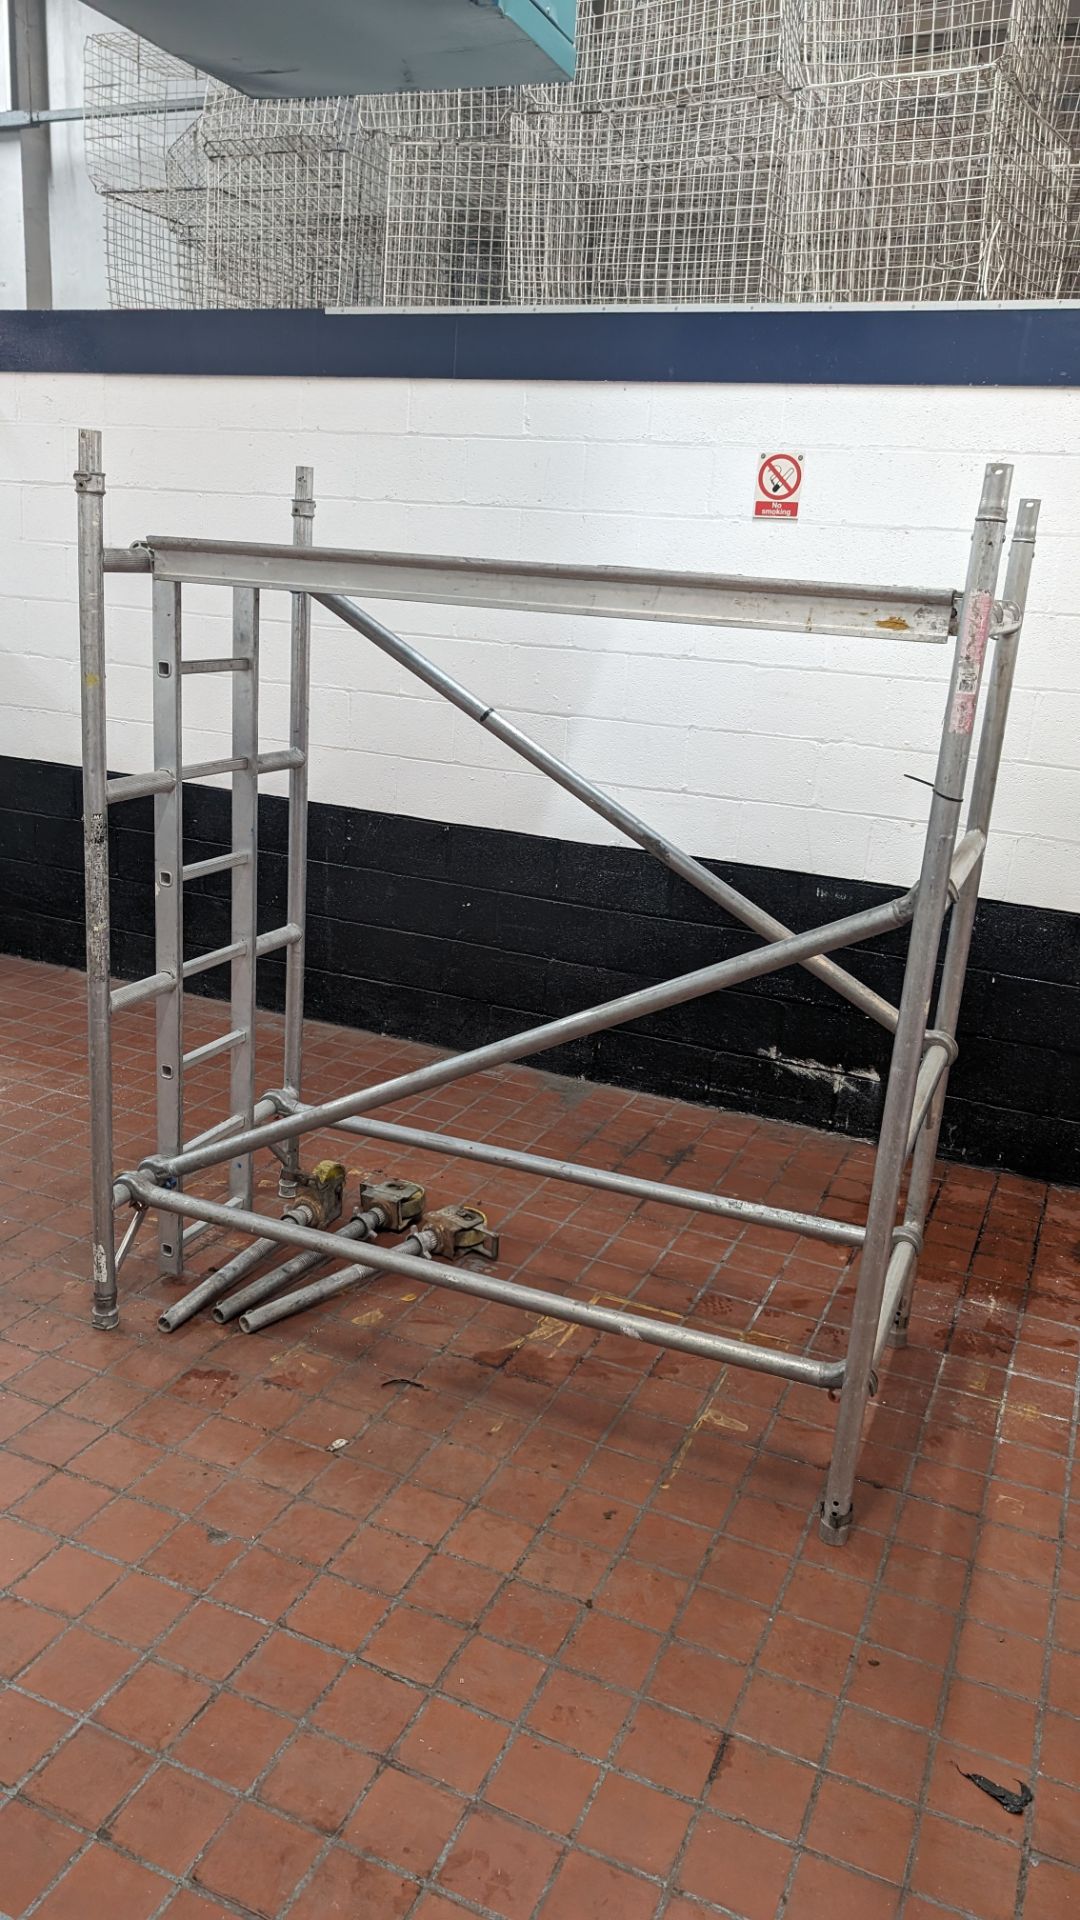 1 off small scaffold tower comprising 2 uprights, 4 beams/braces, 1 platform & 3 wheels